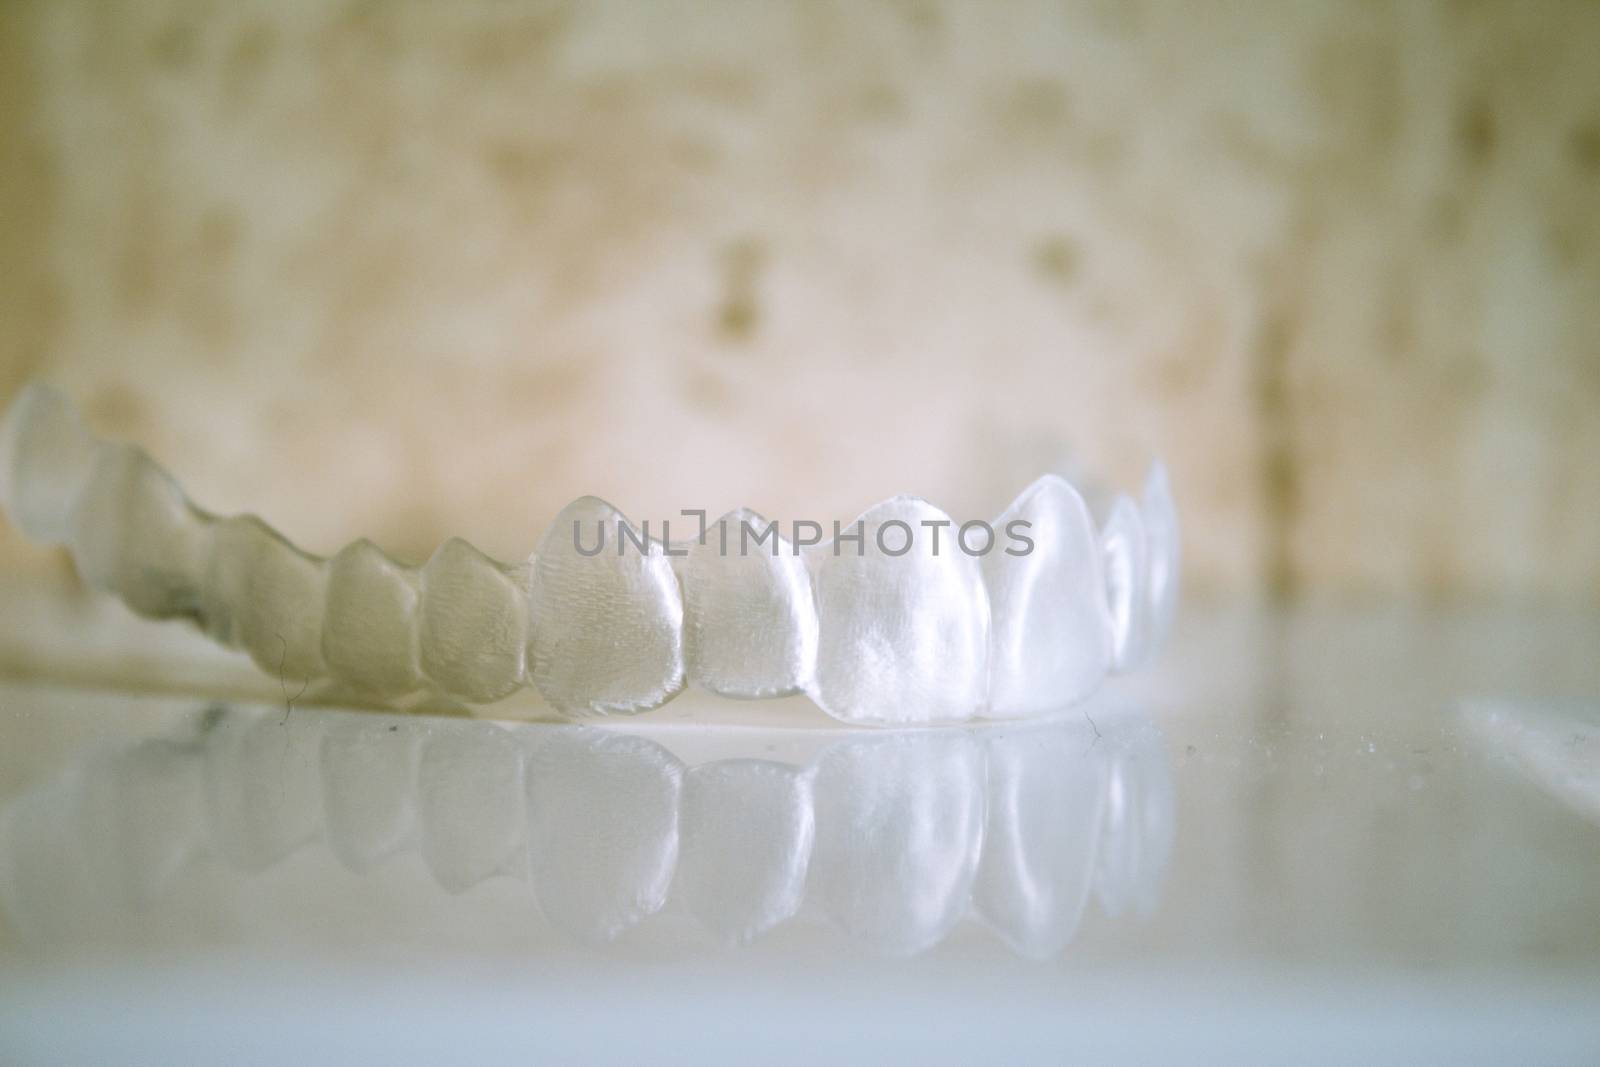 Invisible orthodontics reflected on the surface